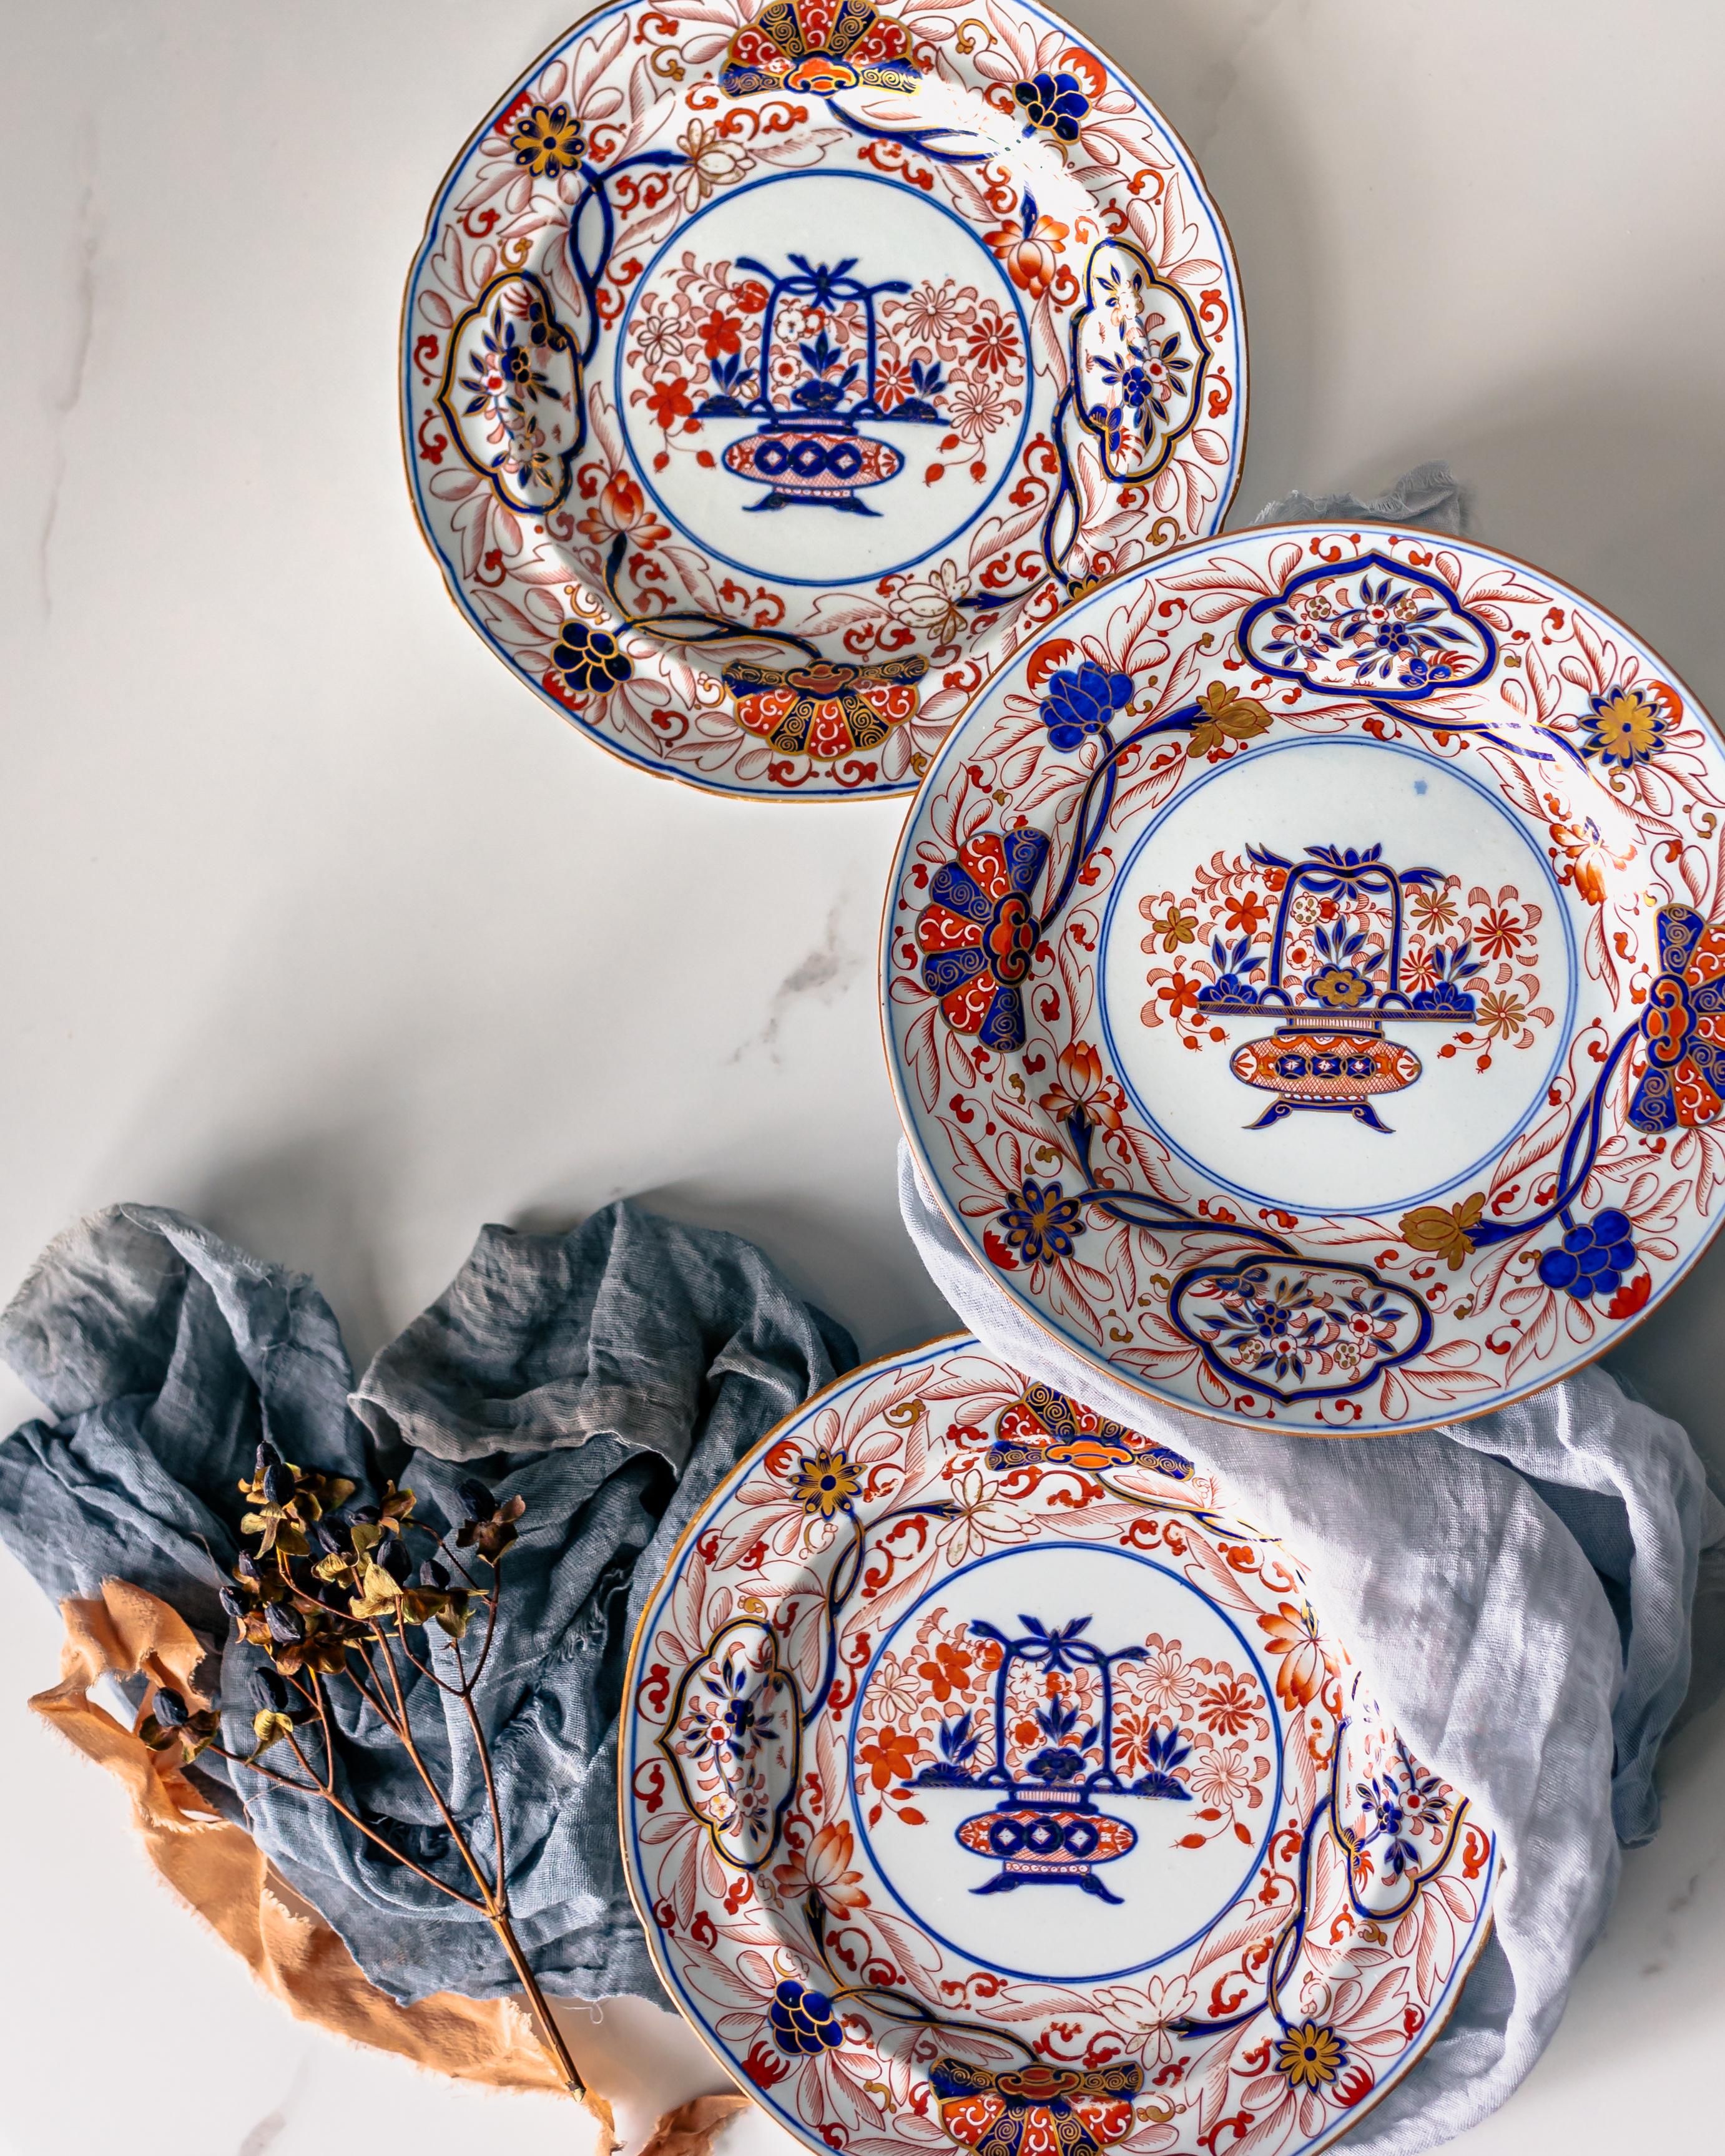 A set of 11 Imari style ironstone dessert dishes, made by Spode circa 1815.

Josiah Spode II began producing stone china in 1813 as an alternative to porcelain. Stone china, also known as ironstone due to its hard and durable fabric, became famous